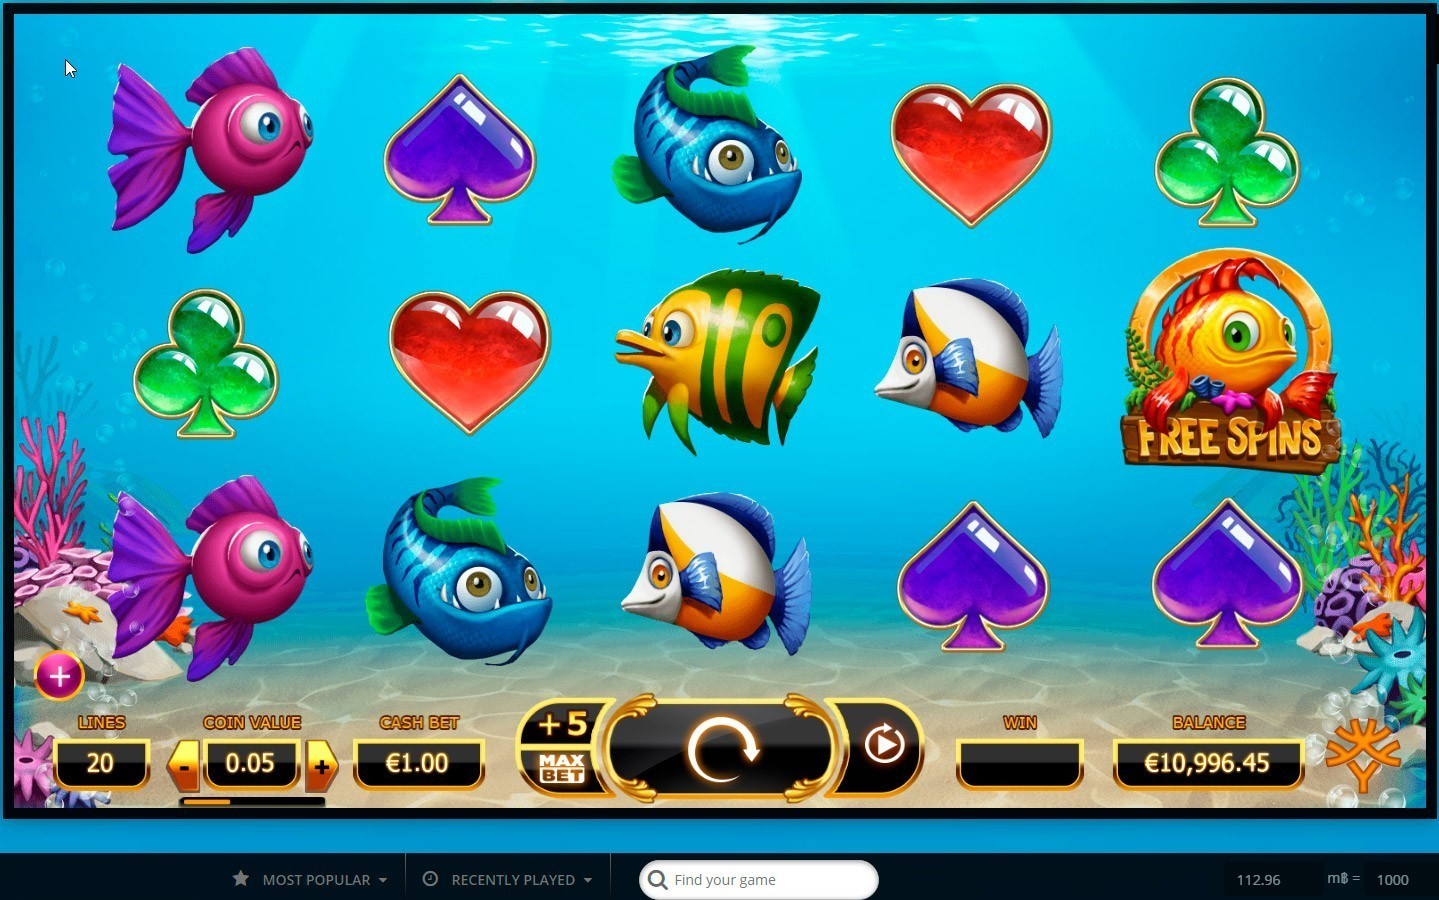  Playamo offers over a thousand slots, table games